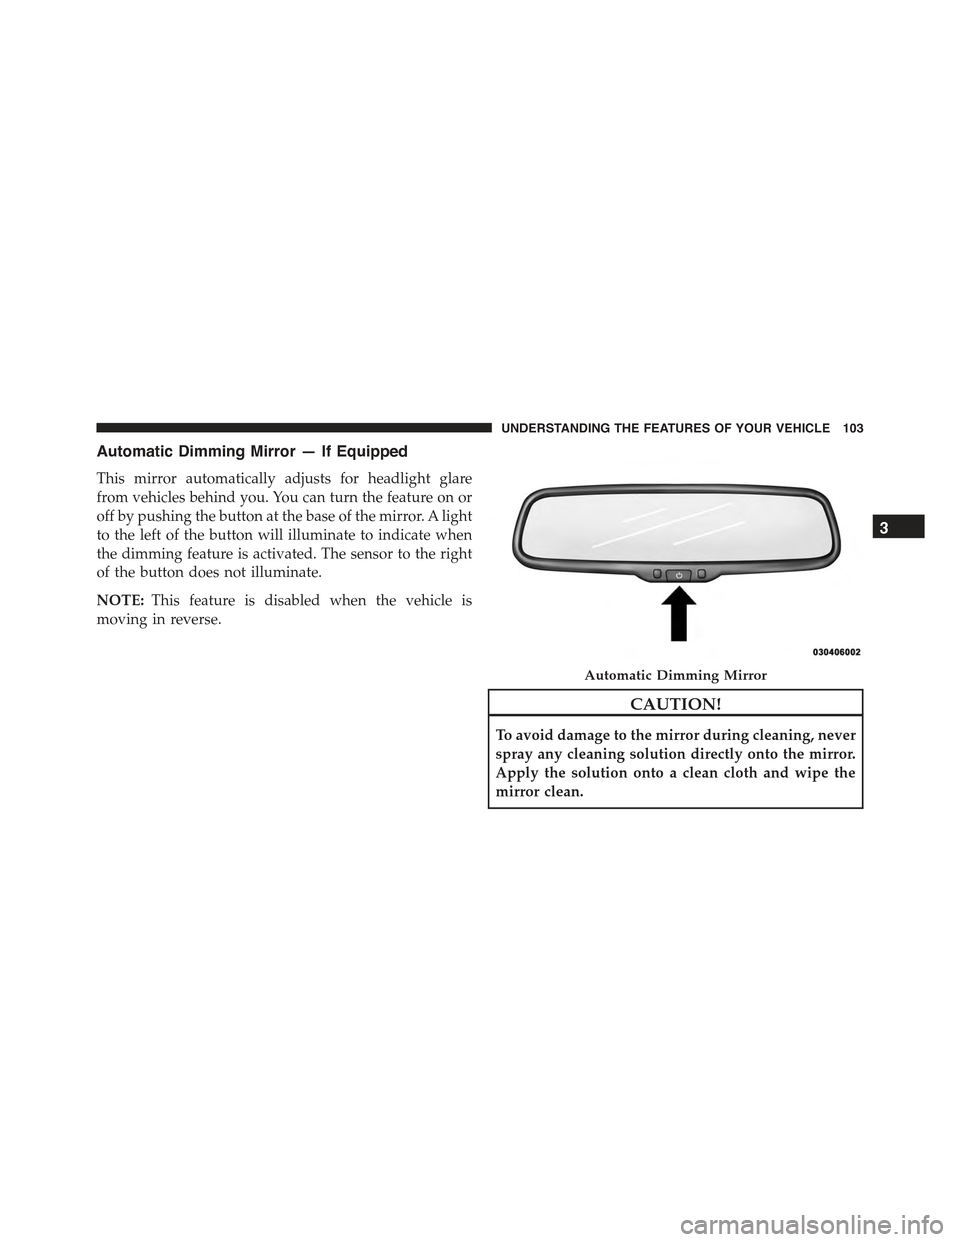 FIAT 500E 2015 2.G Owners Manual Automatic Dimming Mirror — If Equipped
This mirror automatically adjusts for headlight glare
from vehicles behind you. You can turn the feature on or
off by pushing the button at the base of the mir